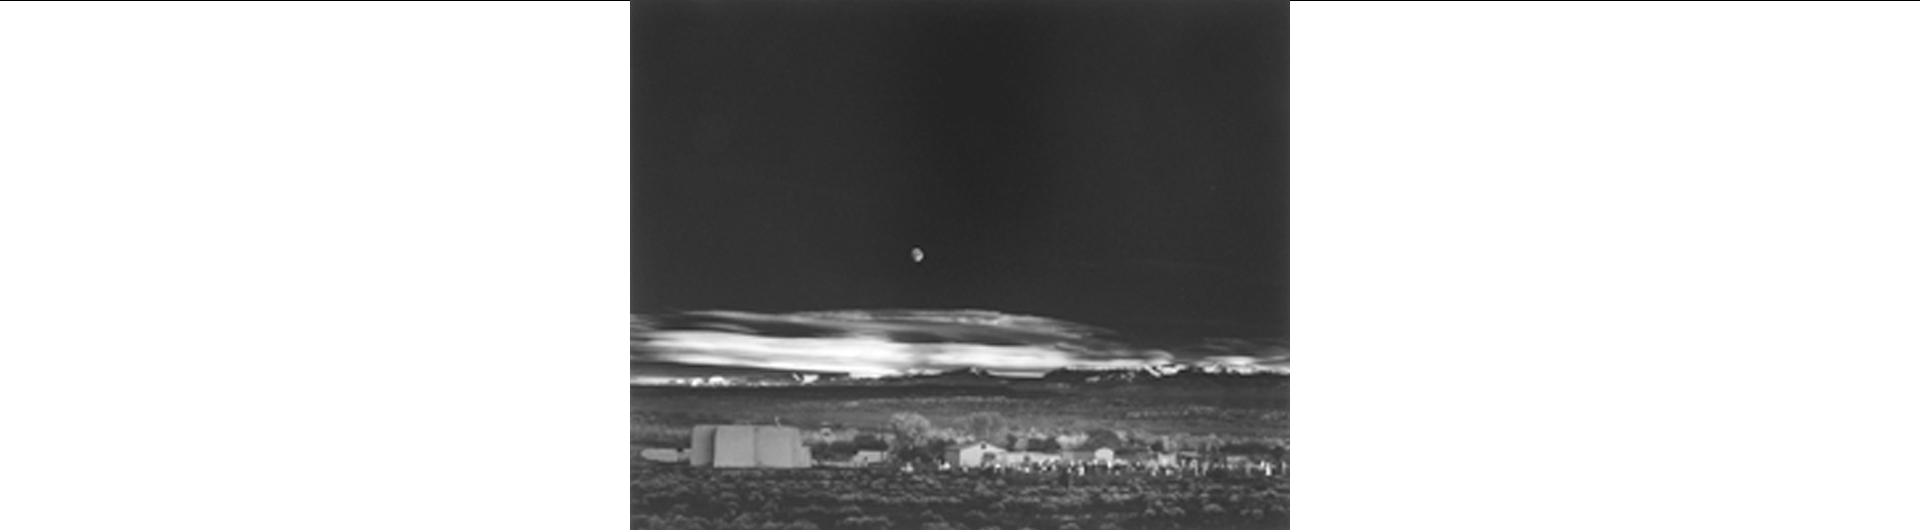 Photography from the Permanent Collection Moonrise by Ansel Adams